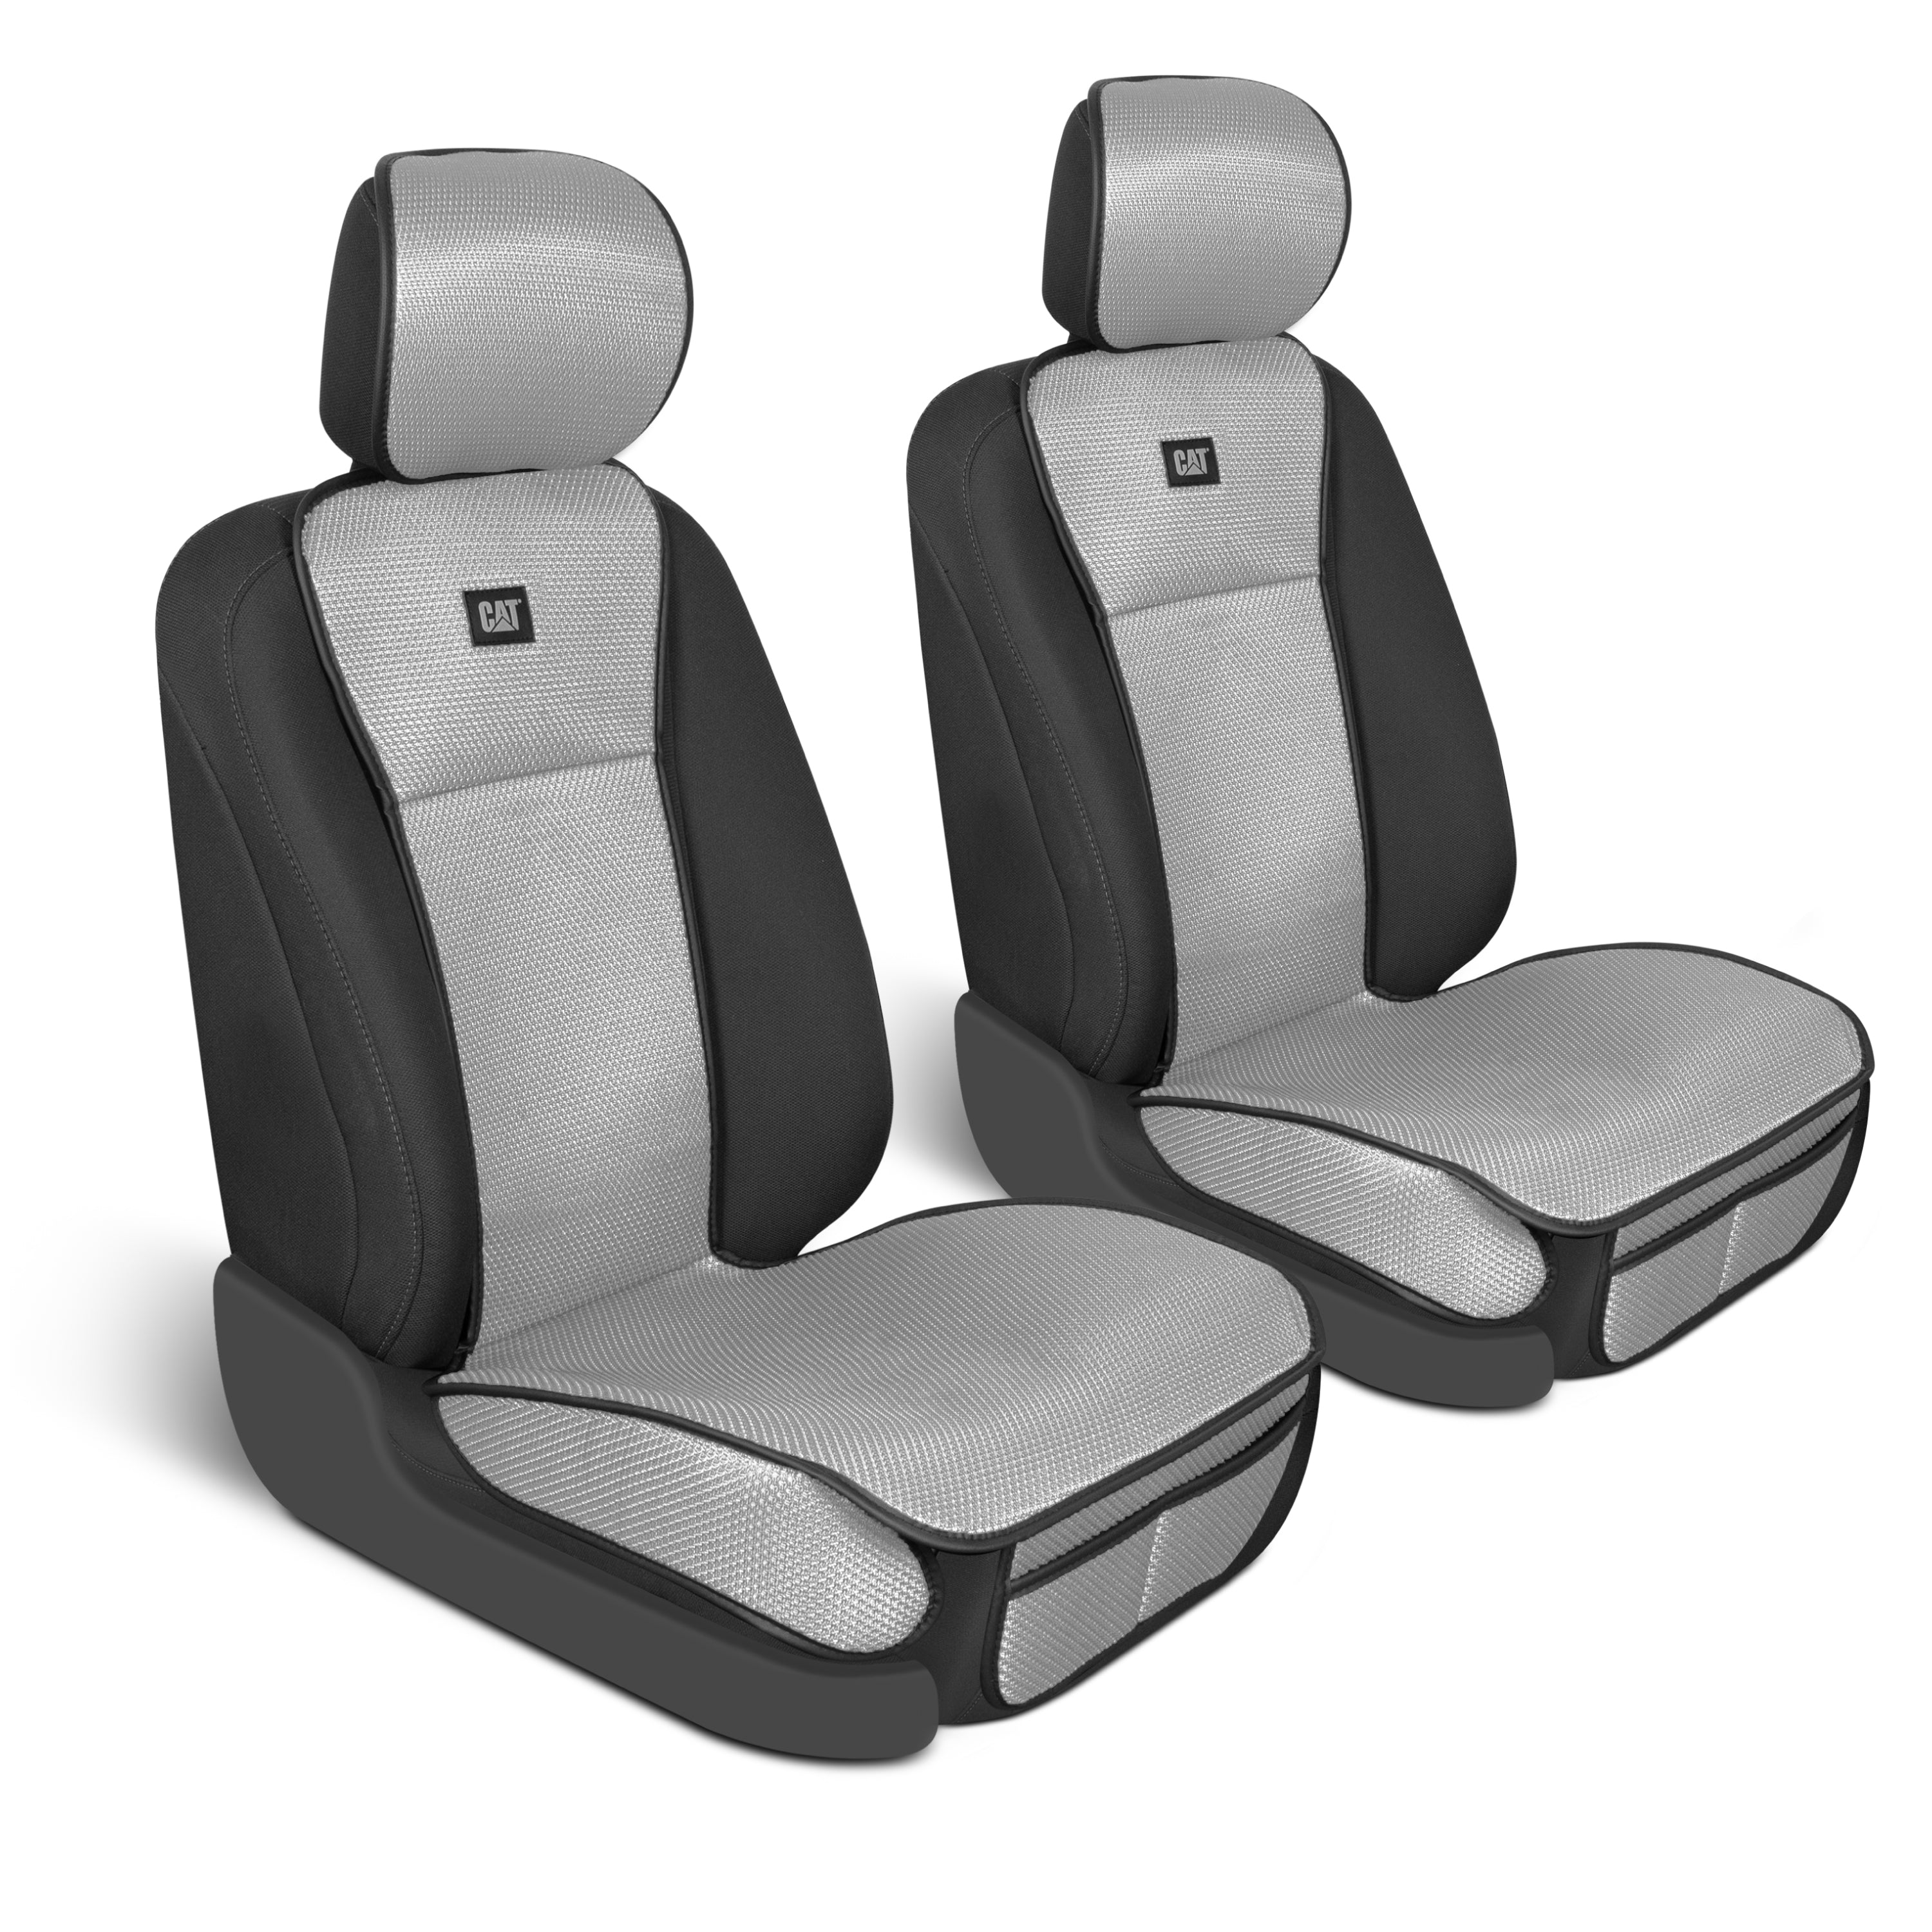 CAT 2-Pack AeroMesh Front Seat Covers - Gray